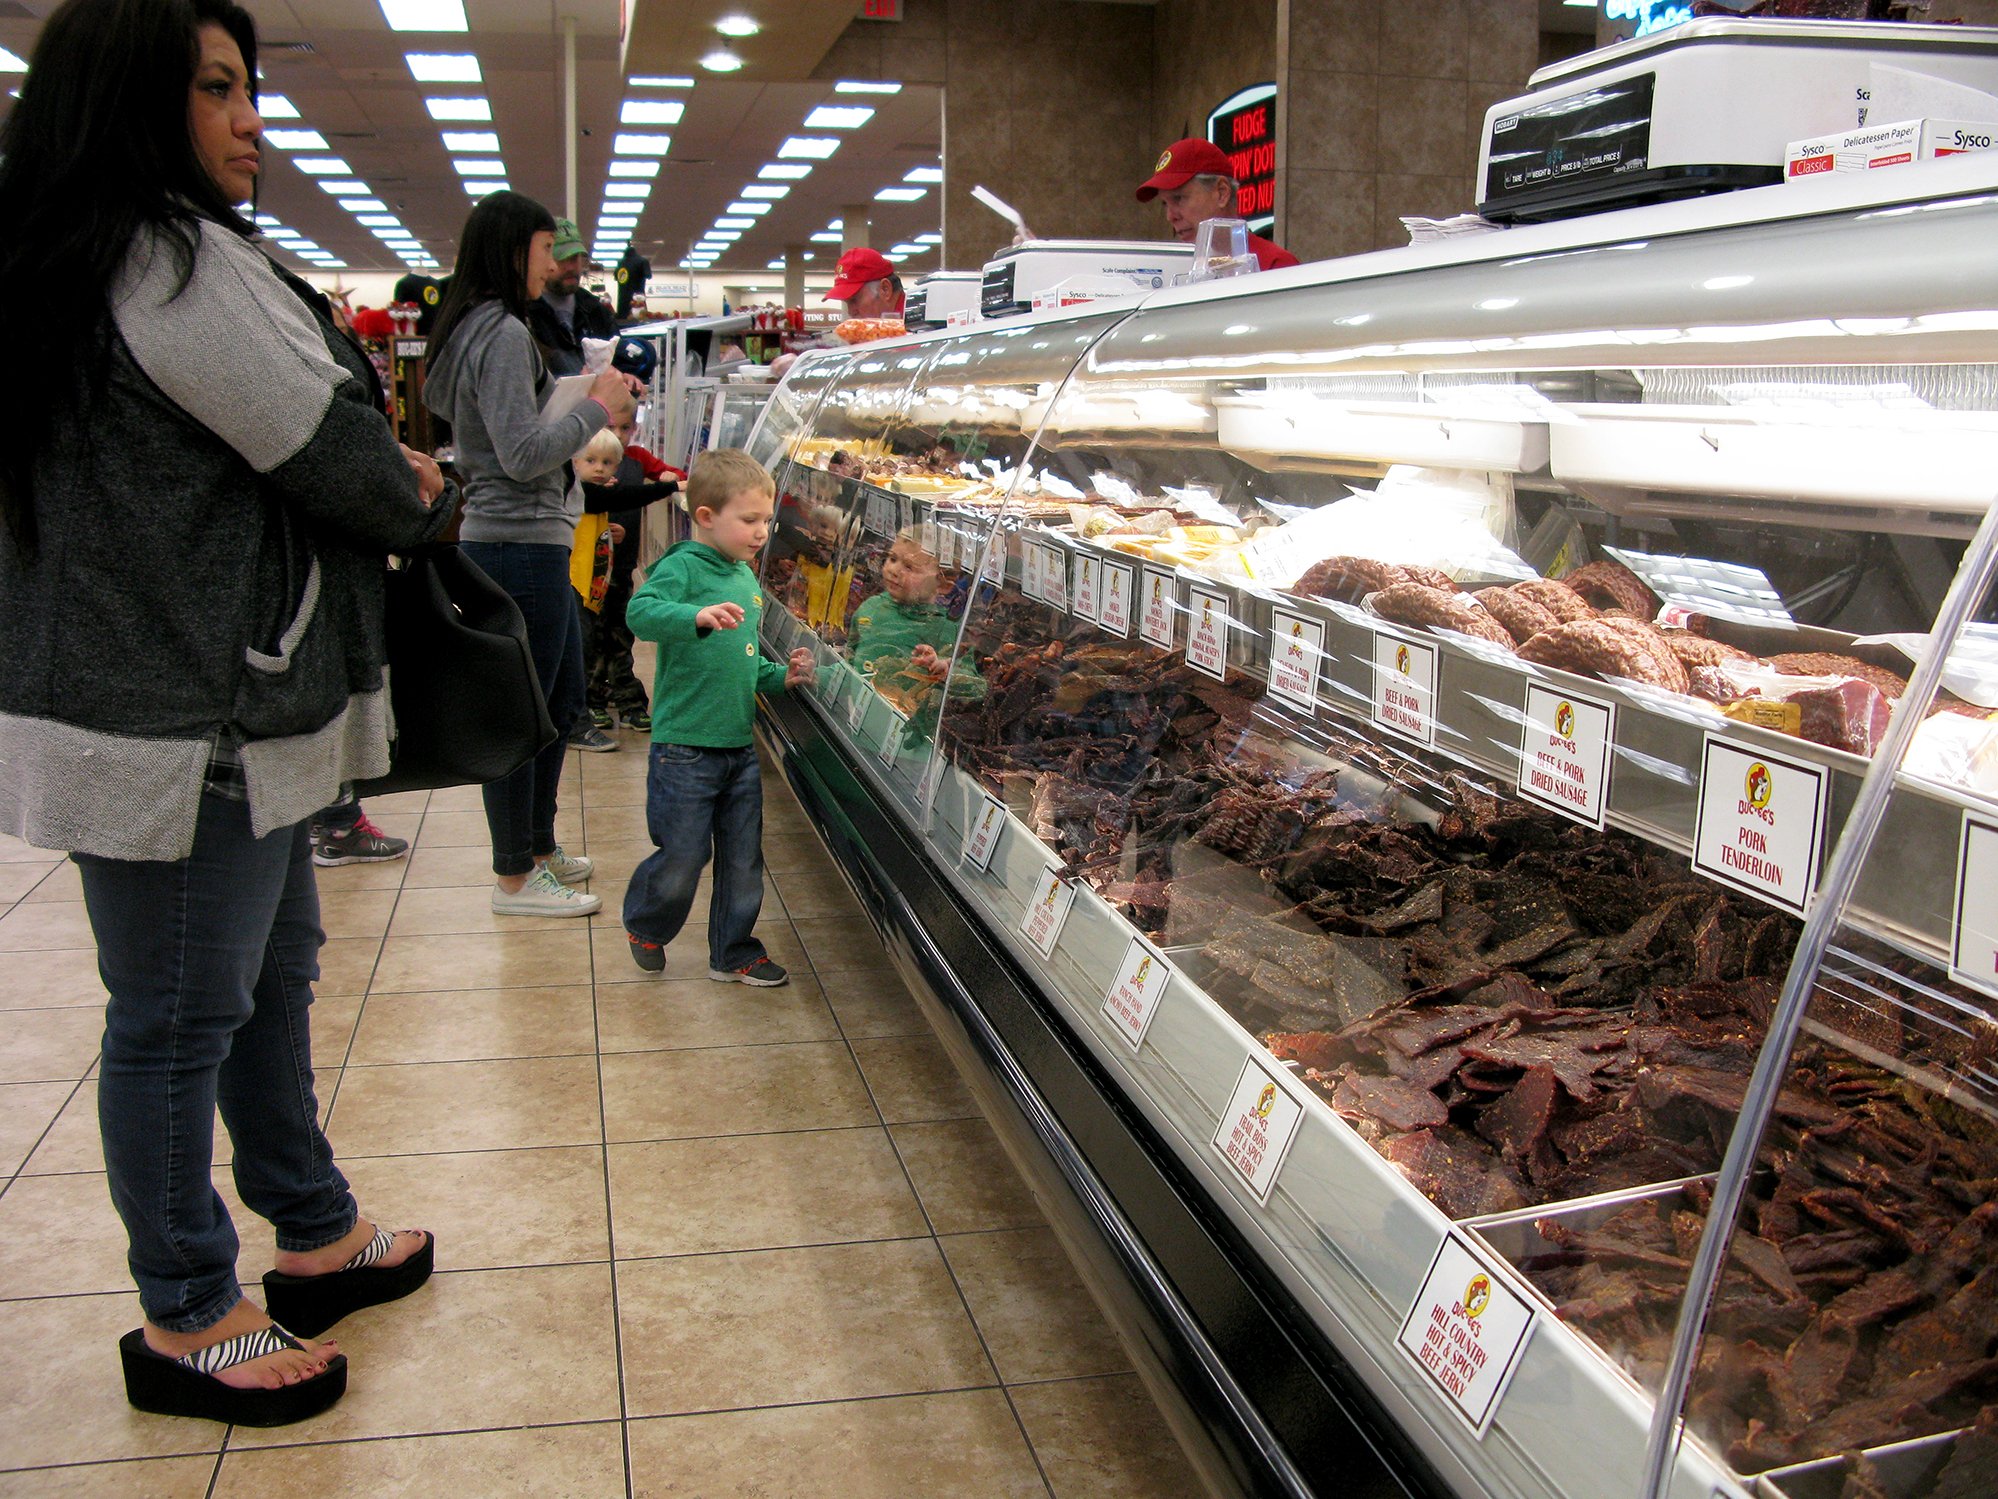 Customers line up at the jerky bar at Buc-ee's in New Braunfels, Texas. Buc-ee's bills itself as the largest convenience store in the world and sells 37 different kinds of jerky.